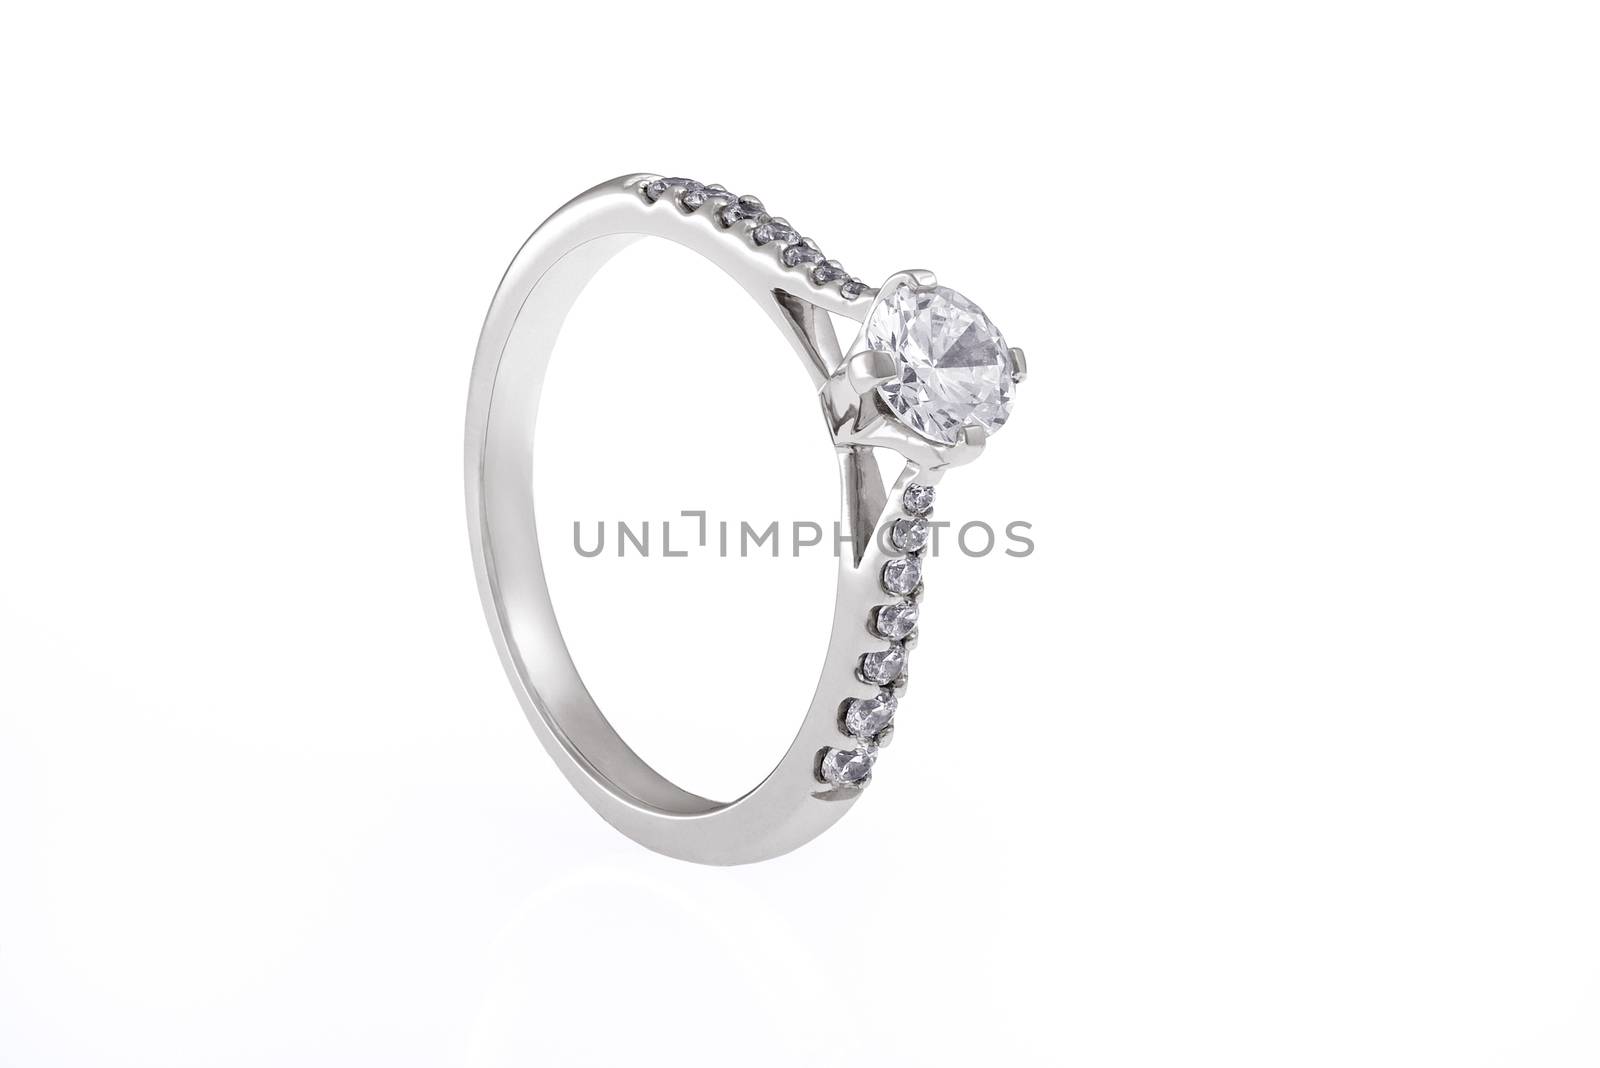 Silver Ring Jewellery with Swarovski Crystals on White Background